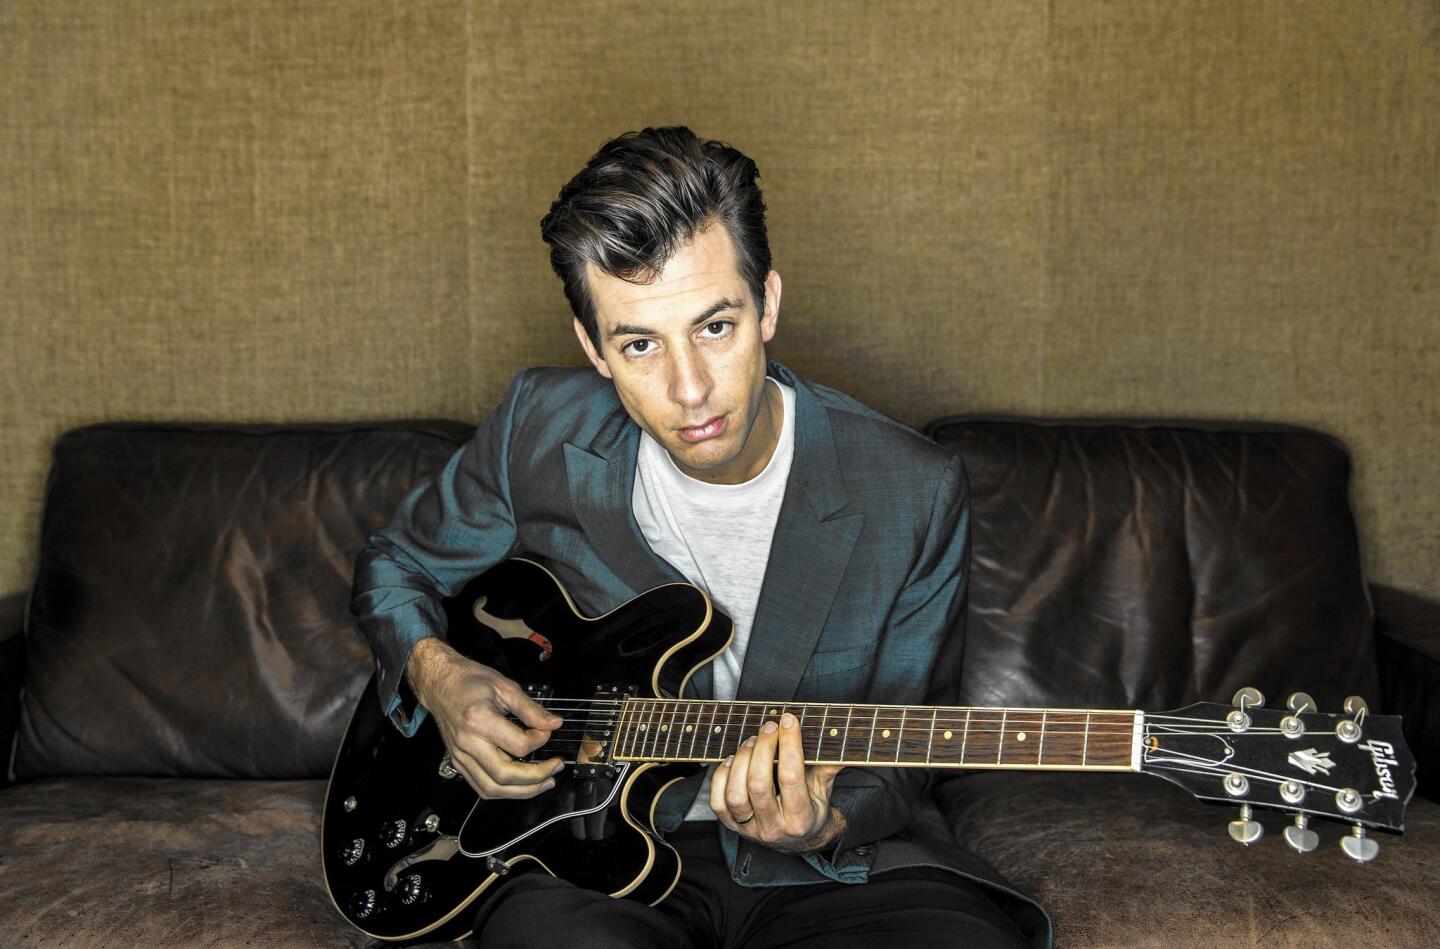 Music producer Mark Ronson on a healthy lifestyle in the rock world